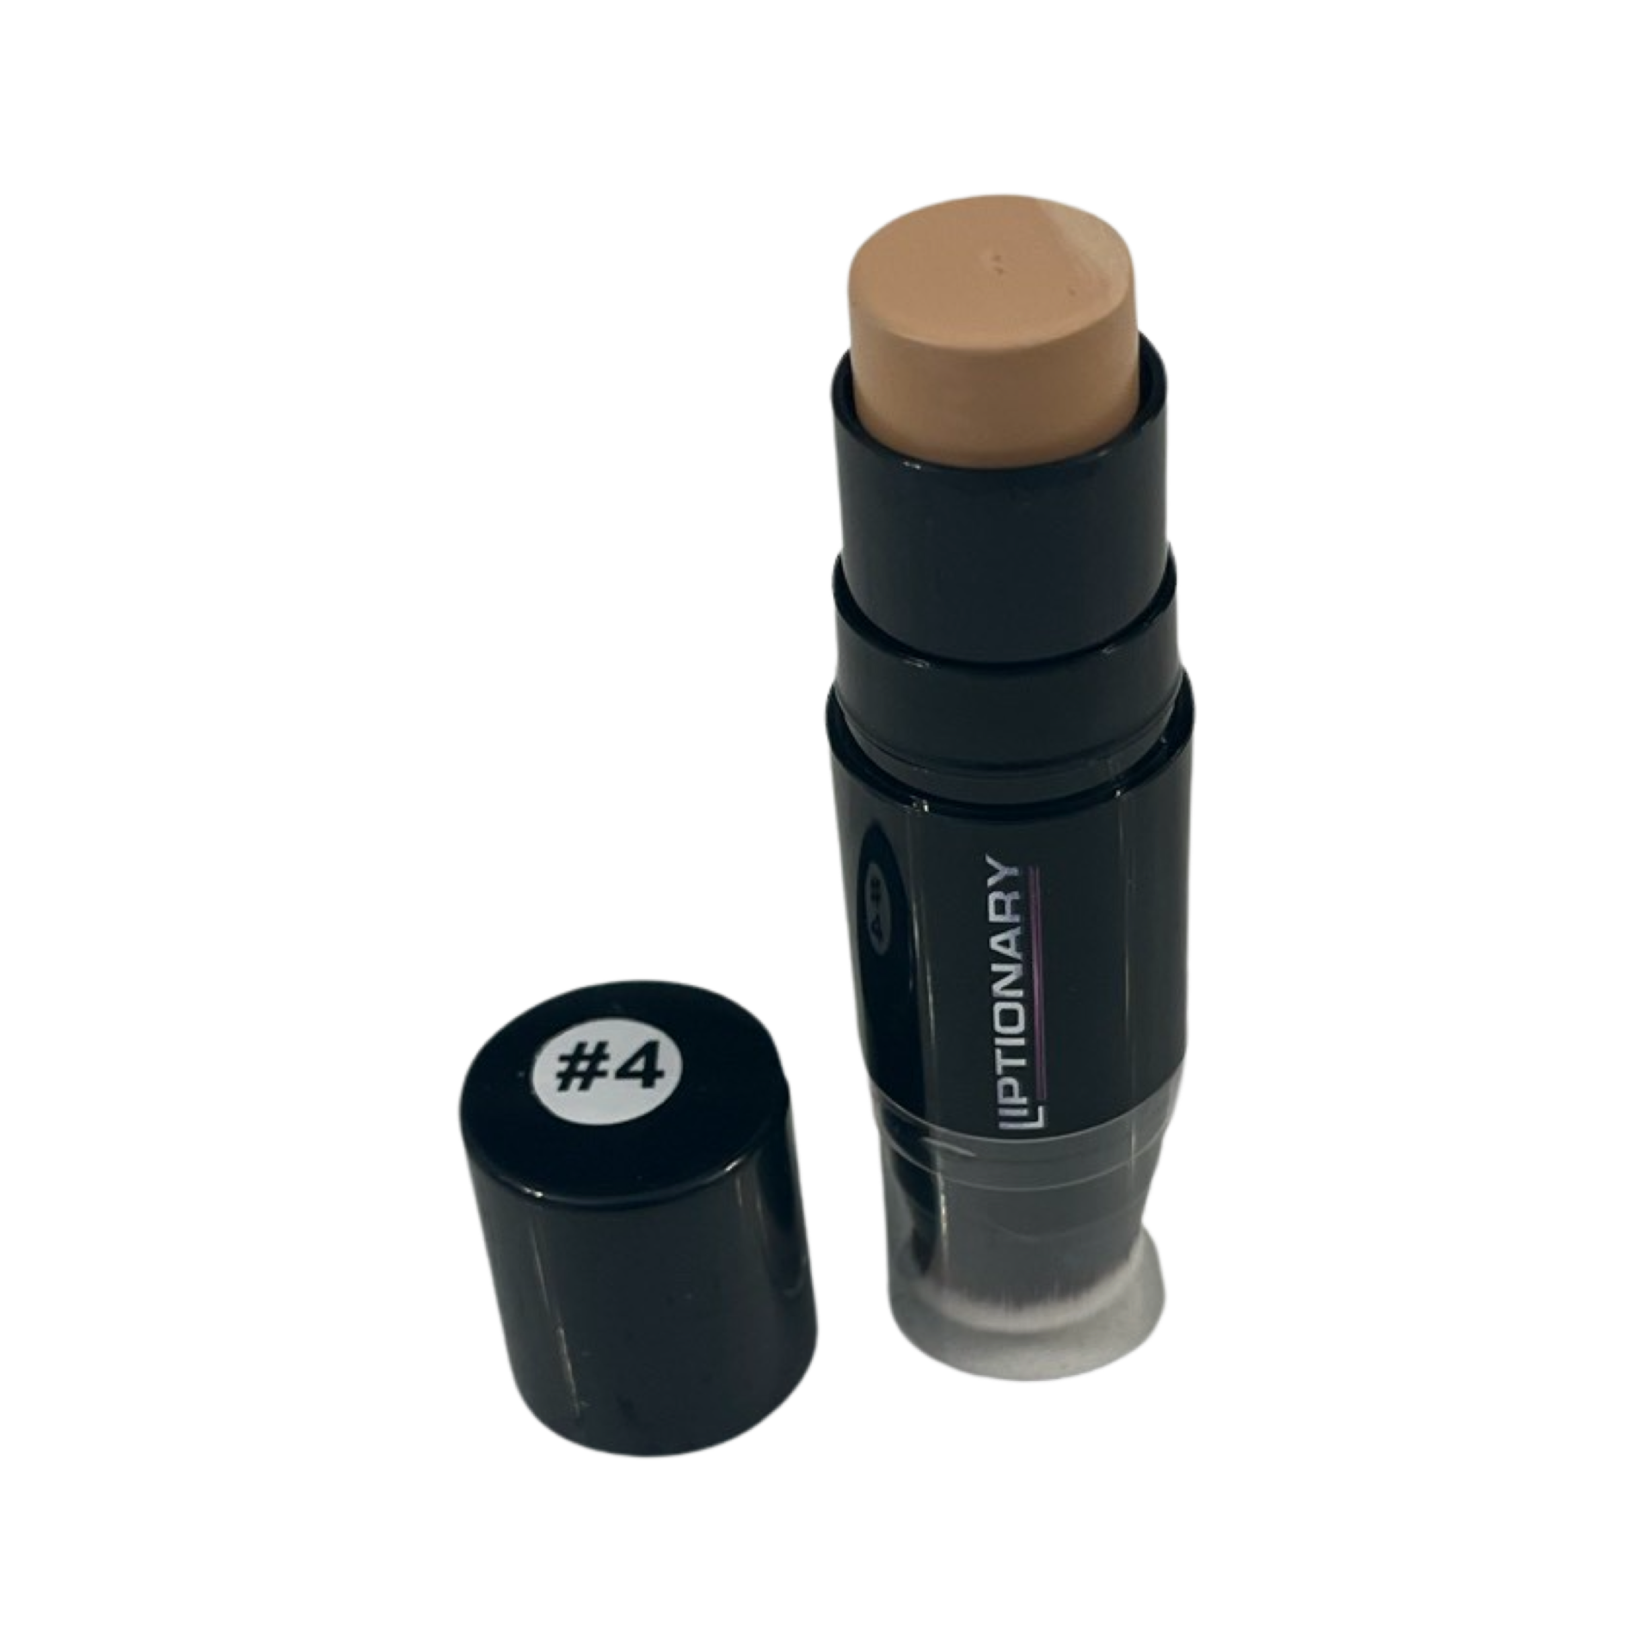 Liptionary 2 in 1 Contour Concealer Clay Stick